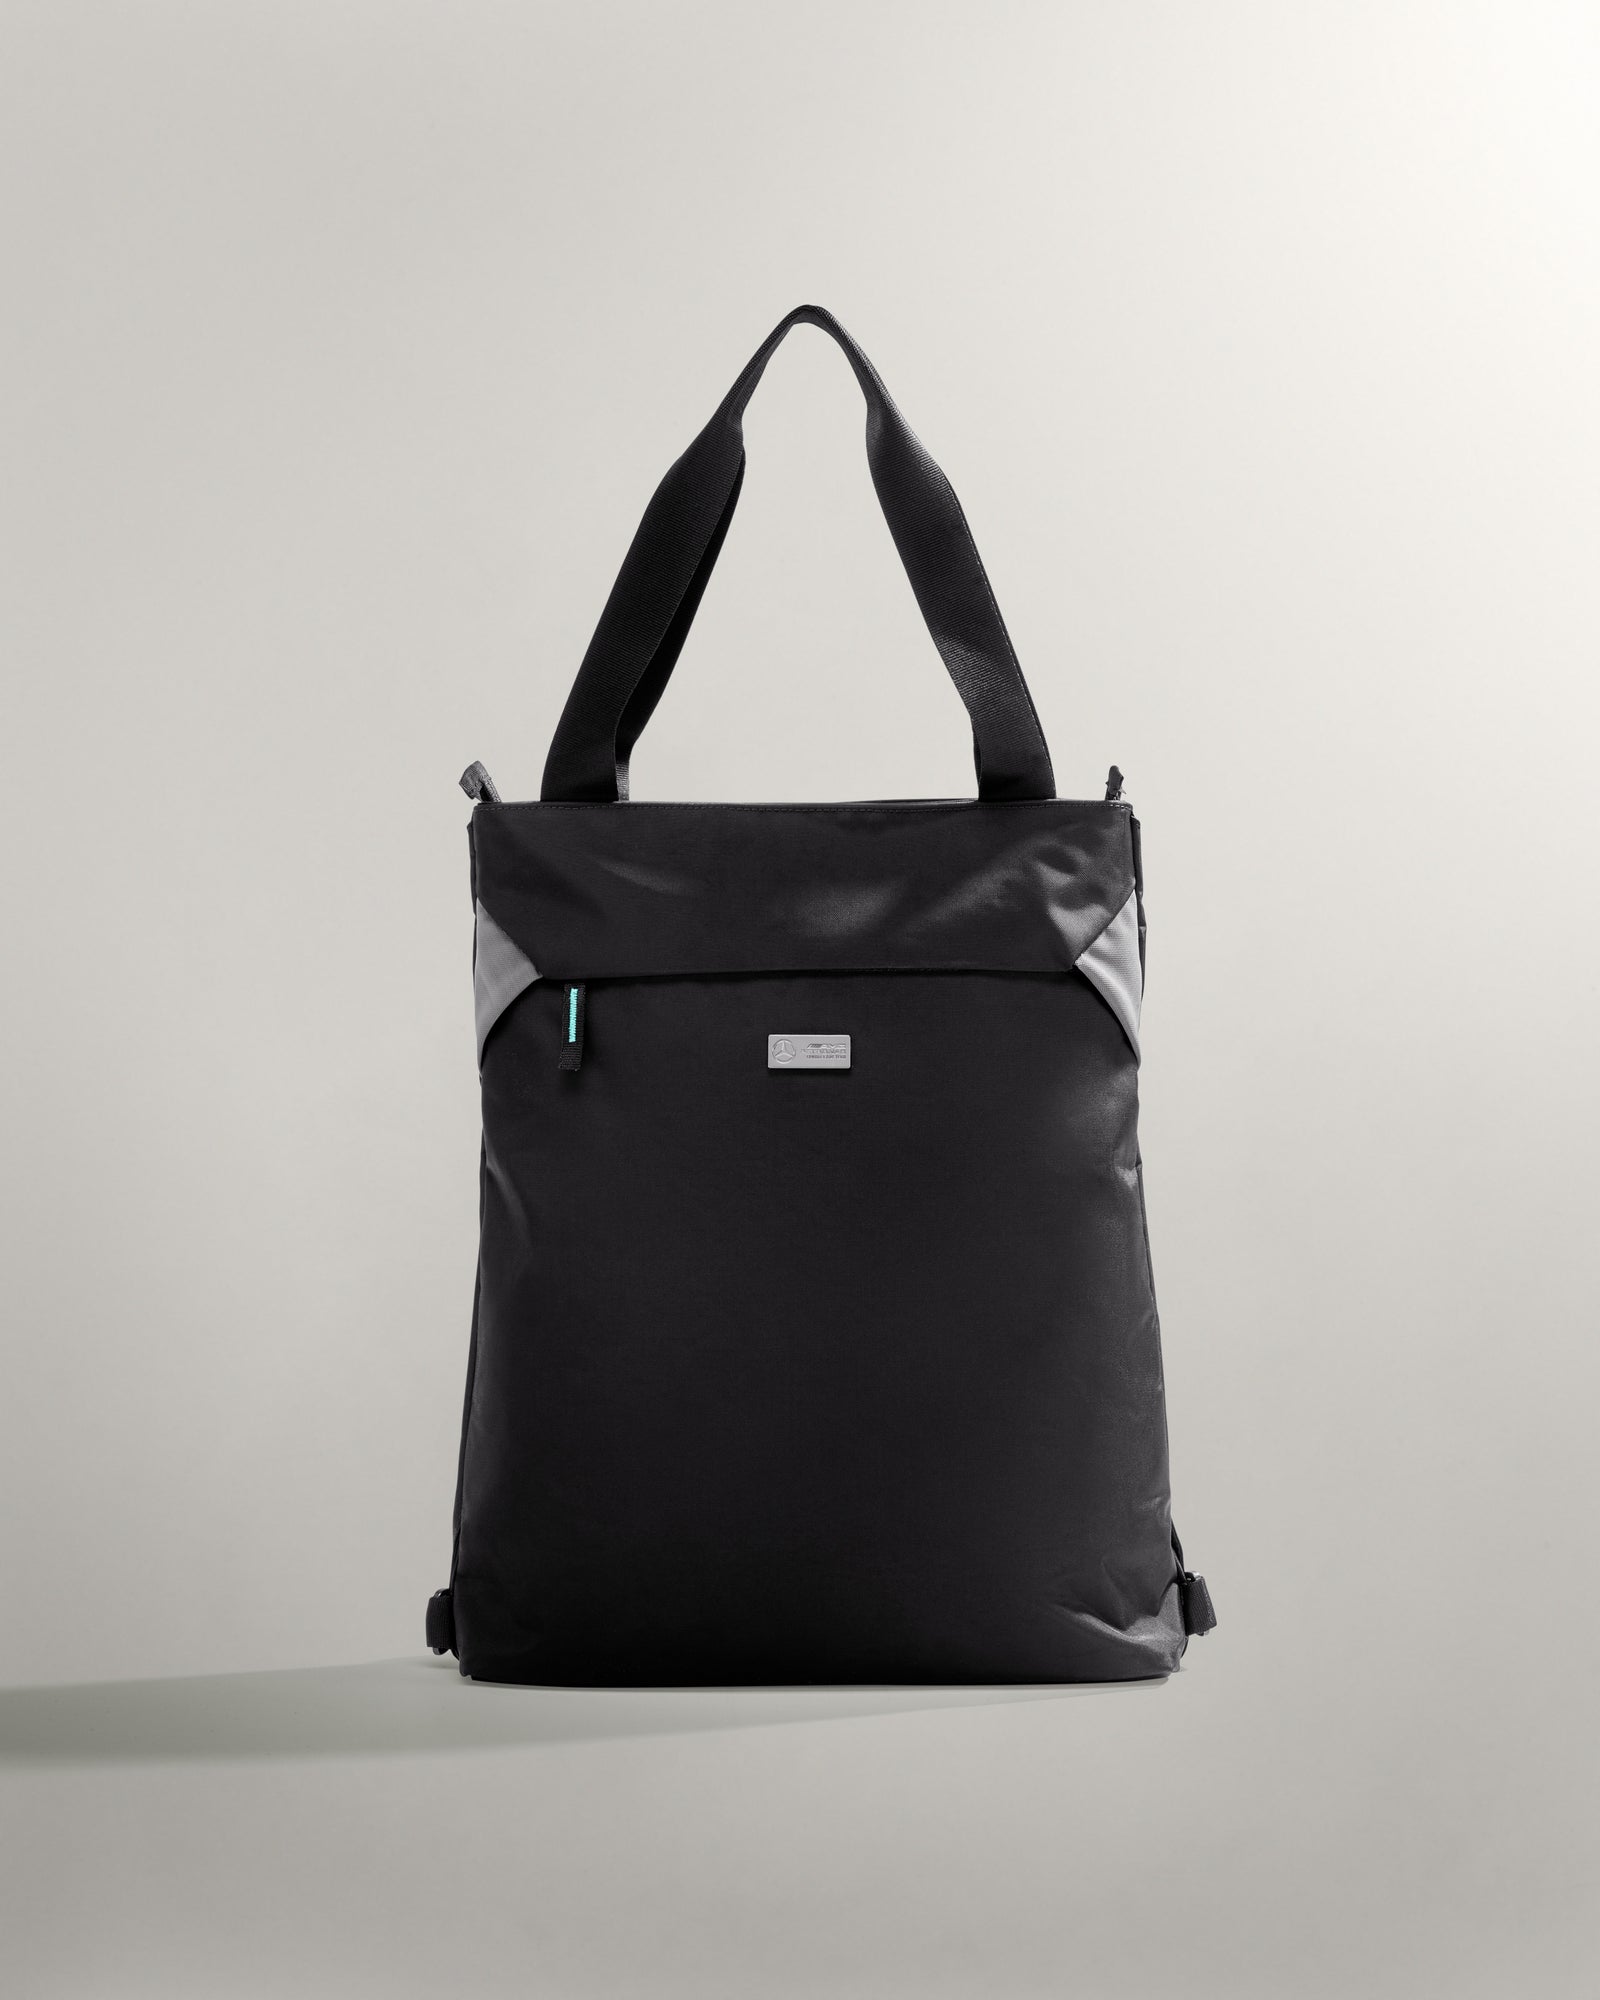 Transformable Tote Bag